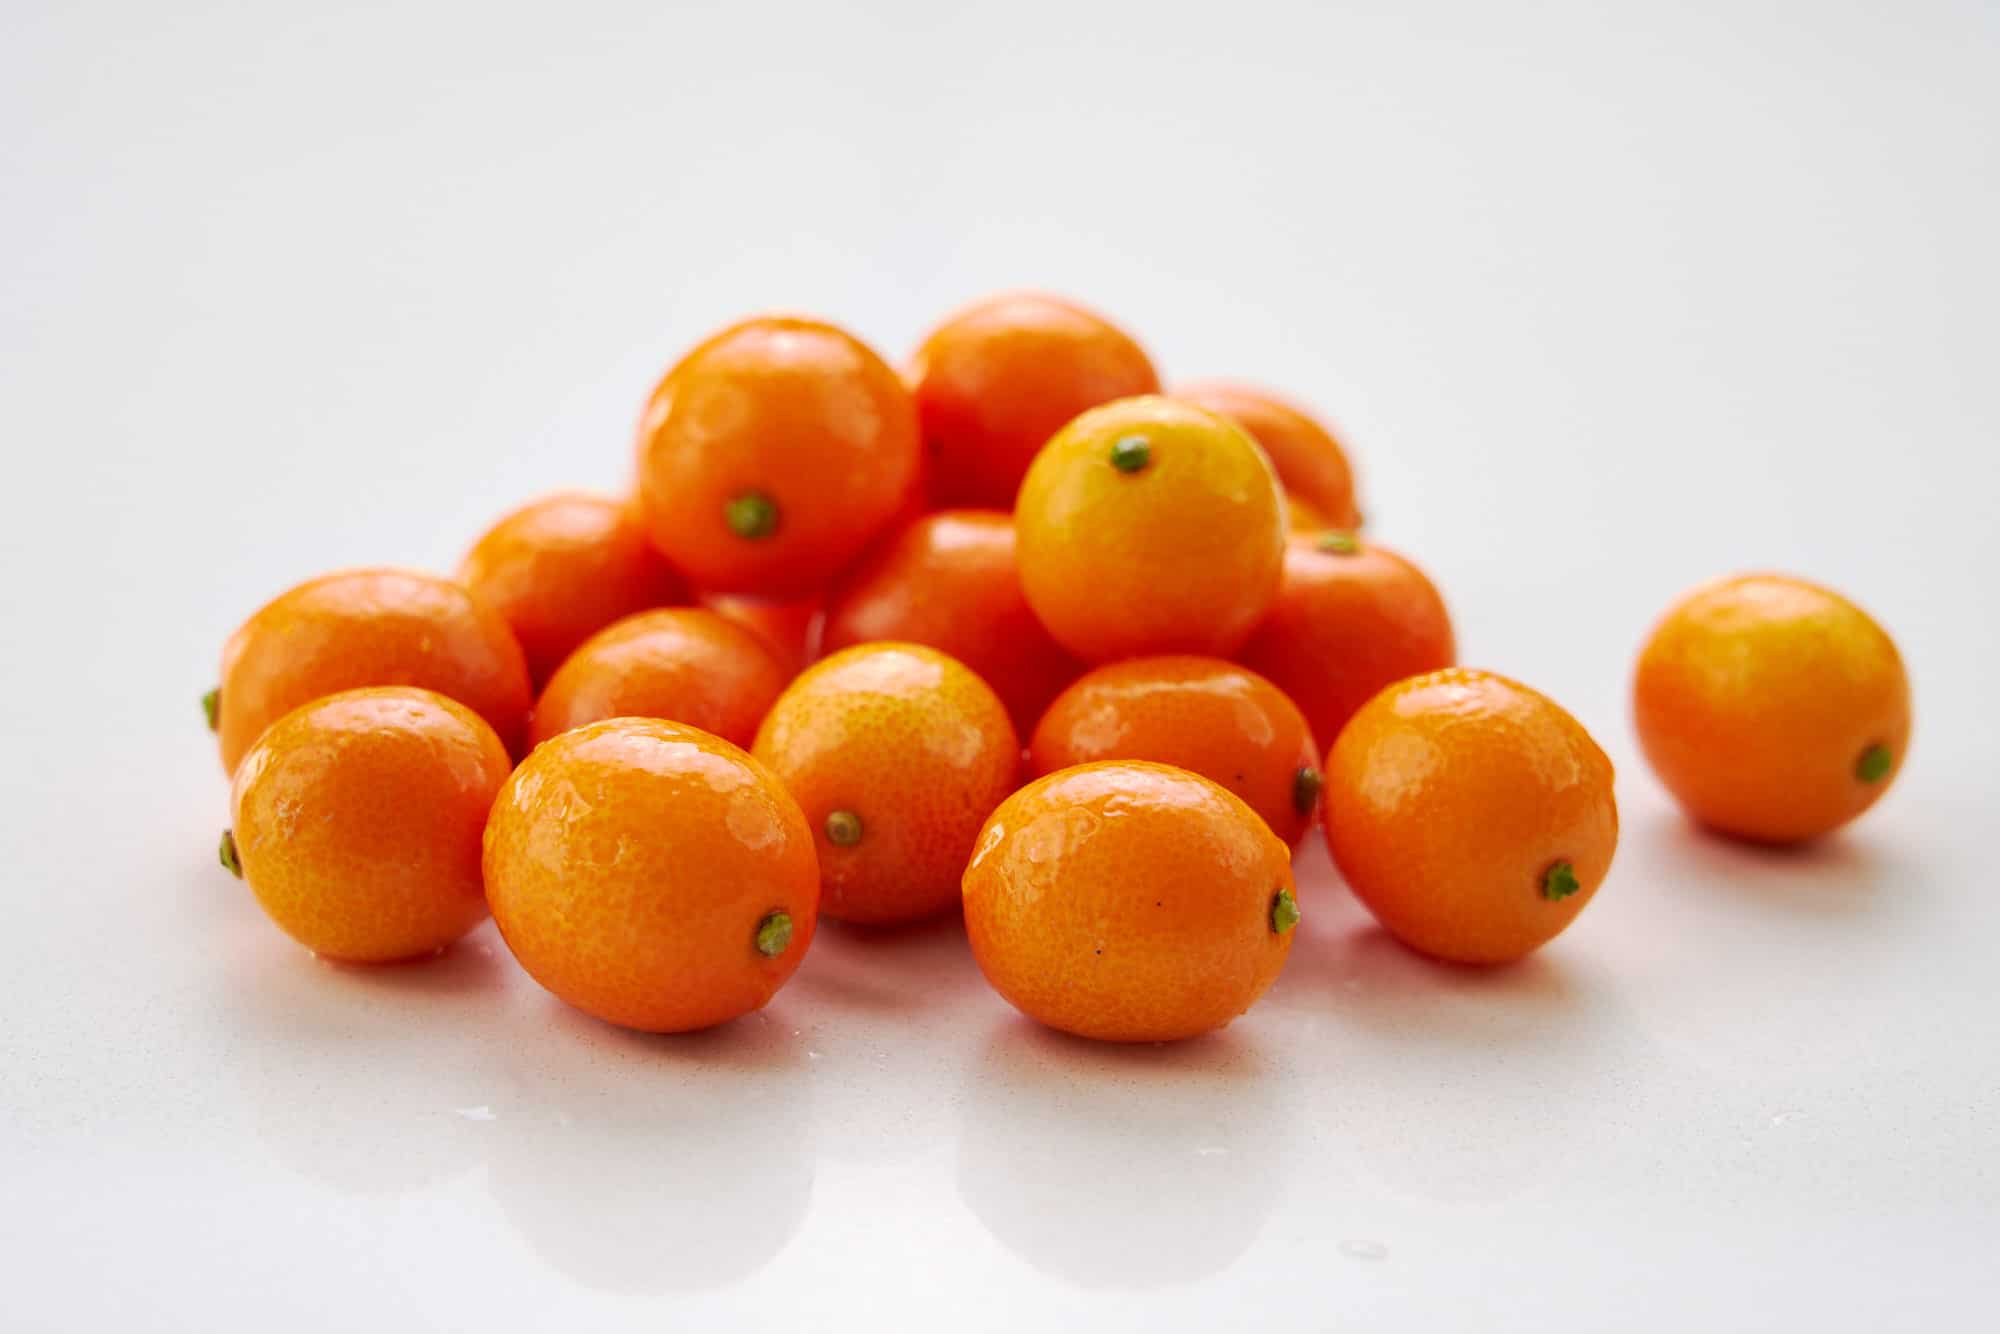 A pile of fresh kumquats on a white surface.